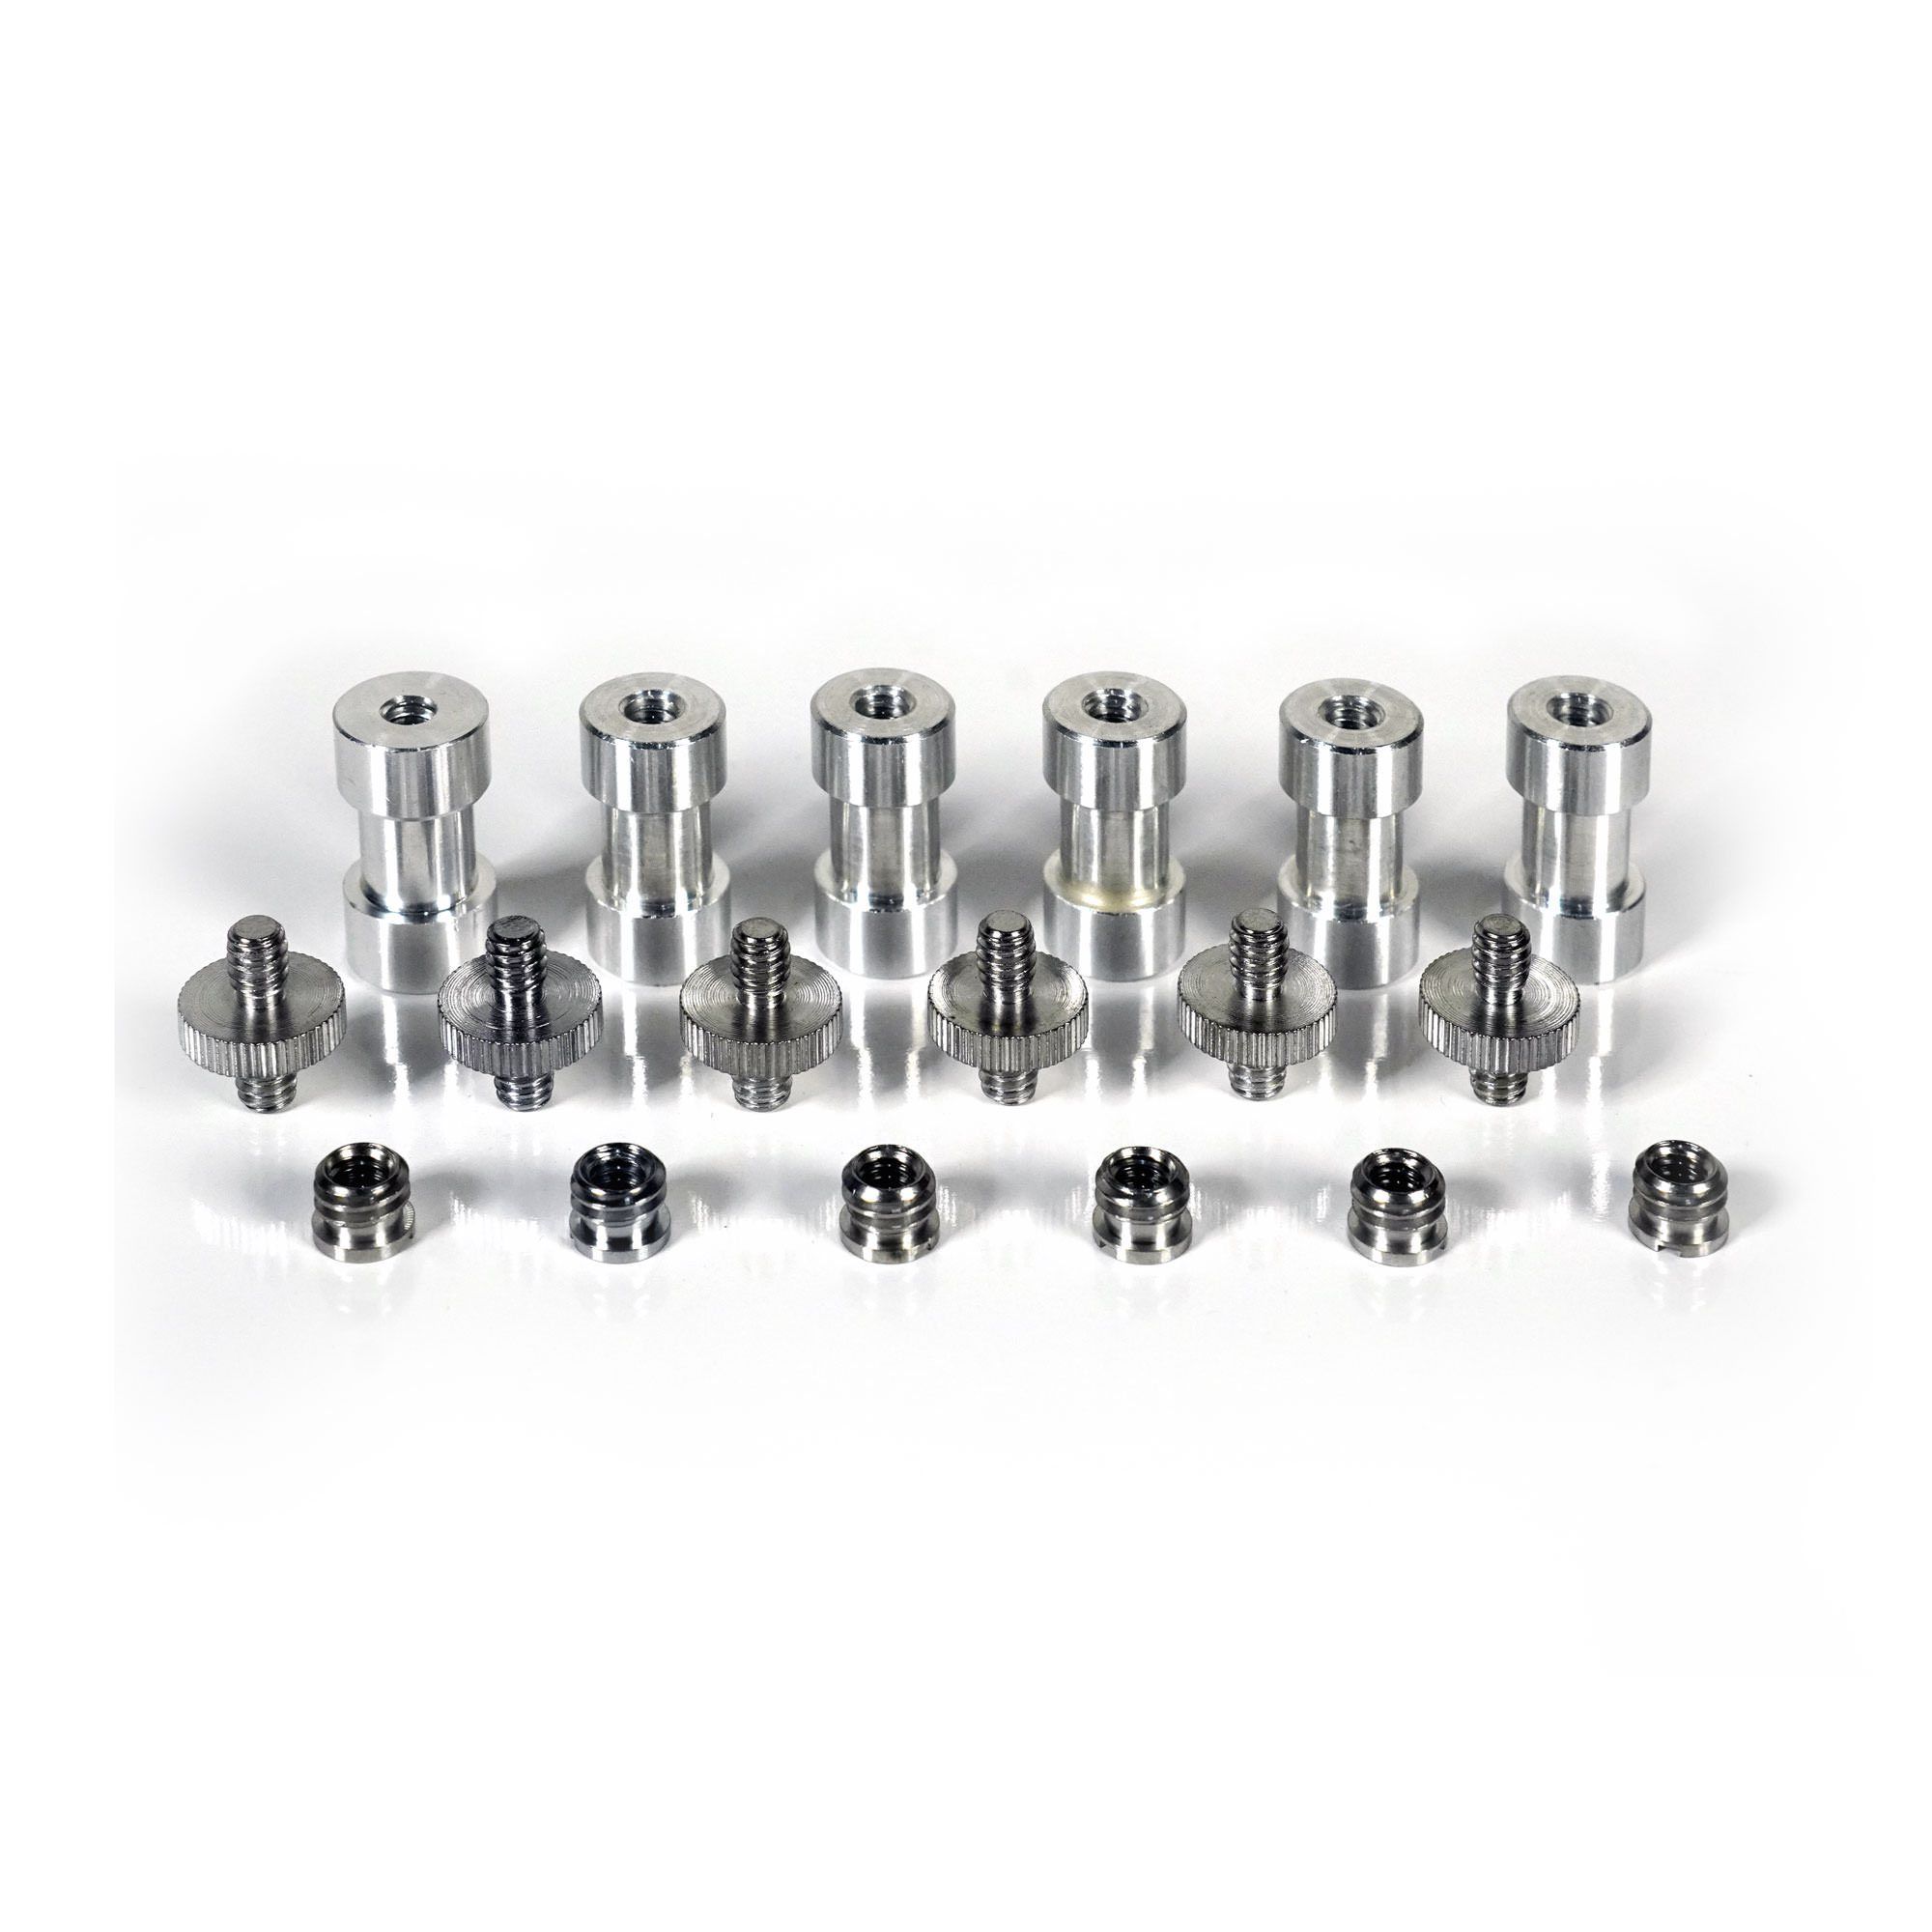 6 Sets of Light Stand Spigot Adapters, Screw Adapters & Thread Converter Rings - 